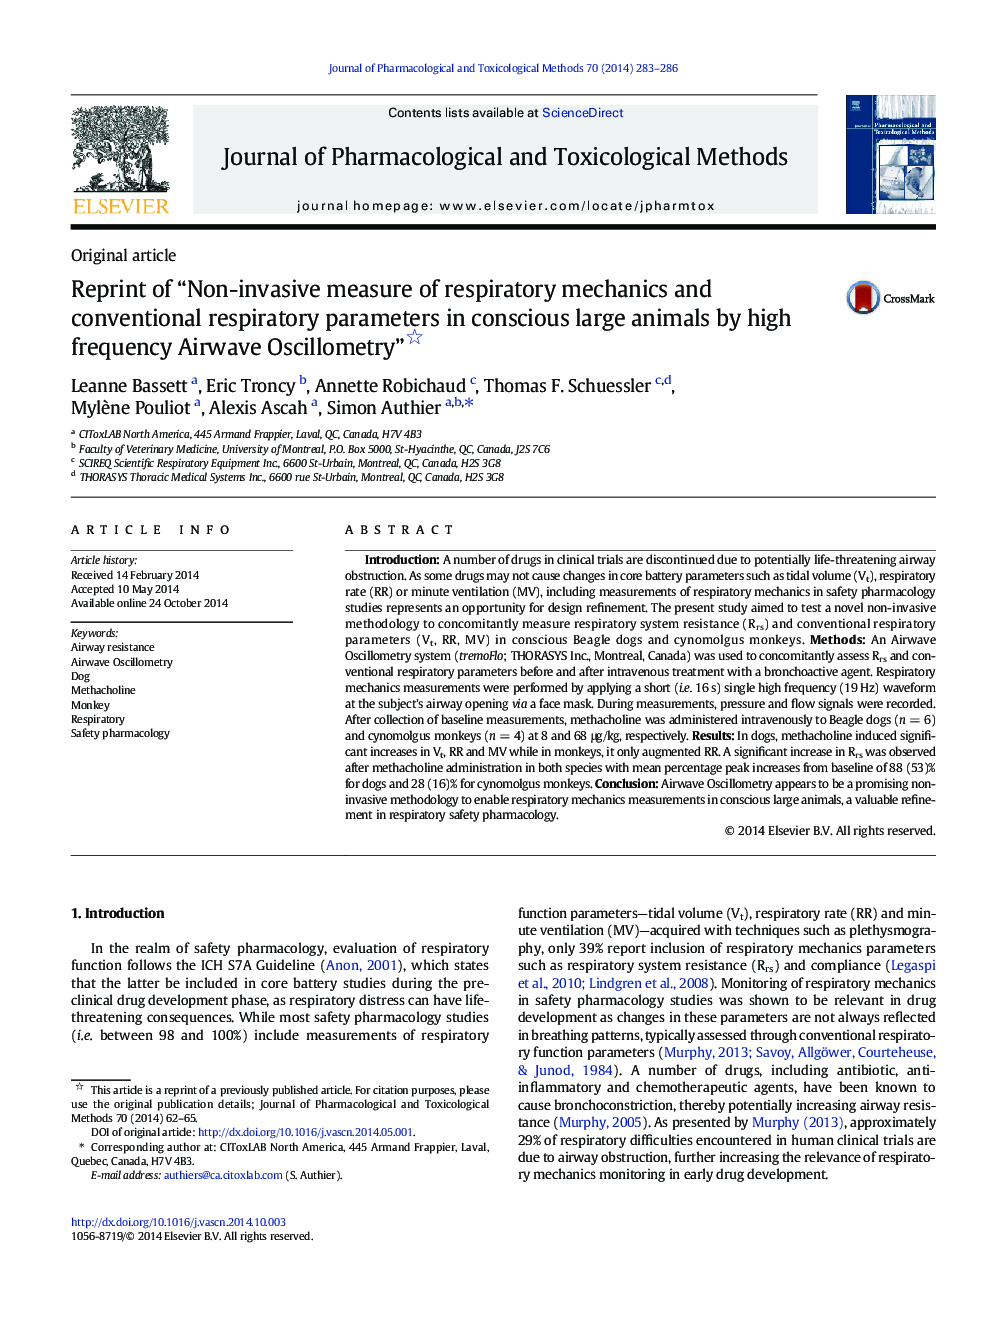 Reprint of “Non-invasive measure of respiratory mechanics and conventional respiratory parameters in conscious large animals by high frequency Airwave Oscillometry”